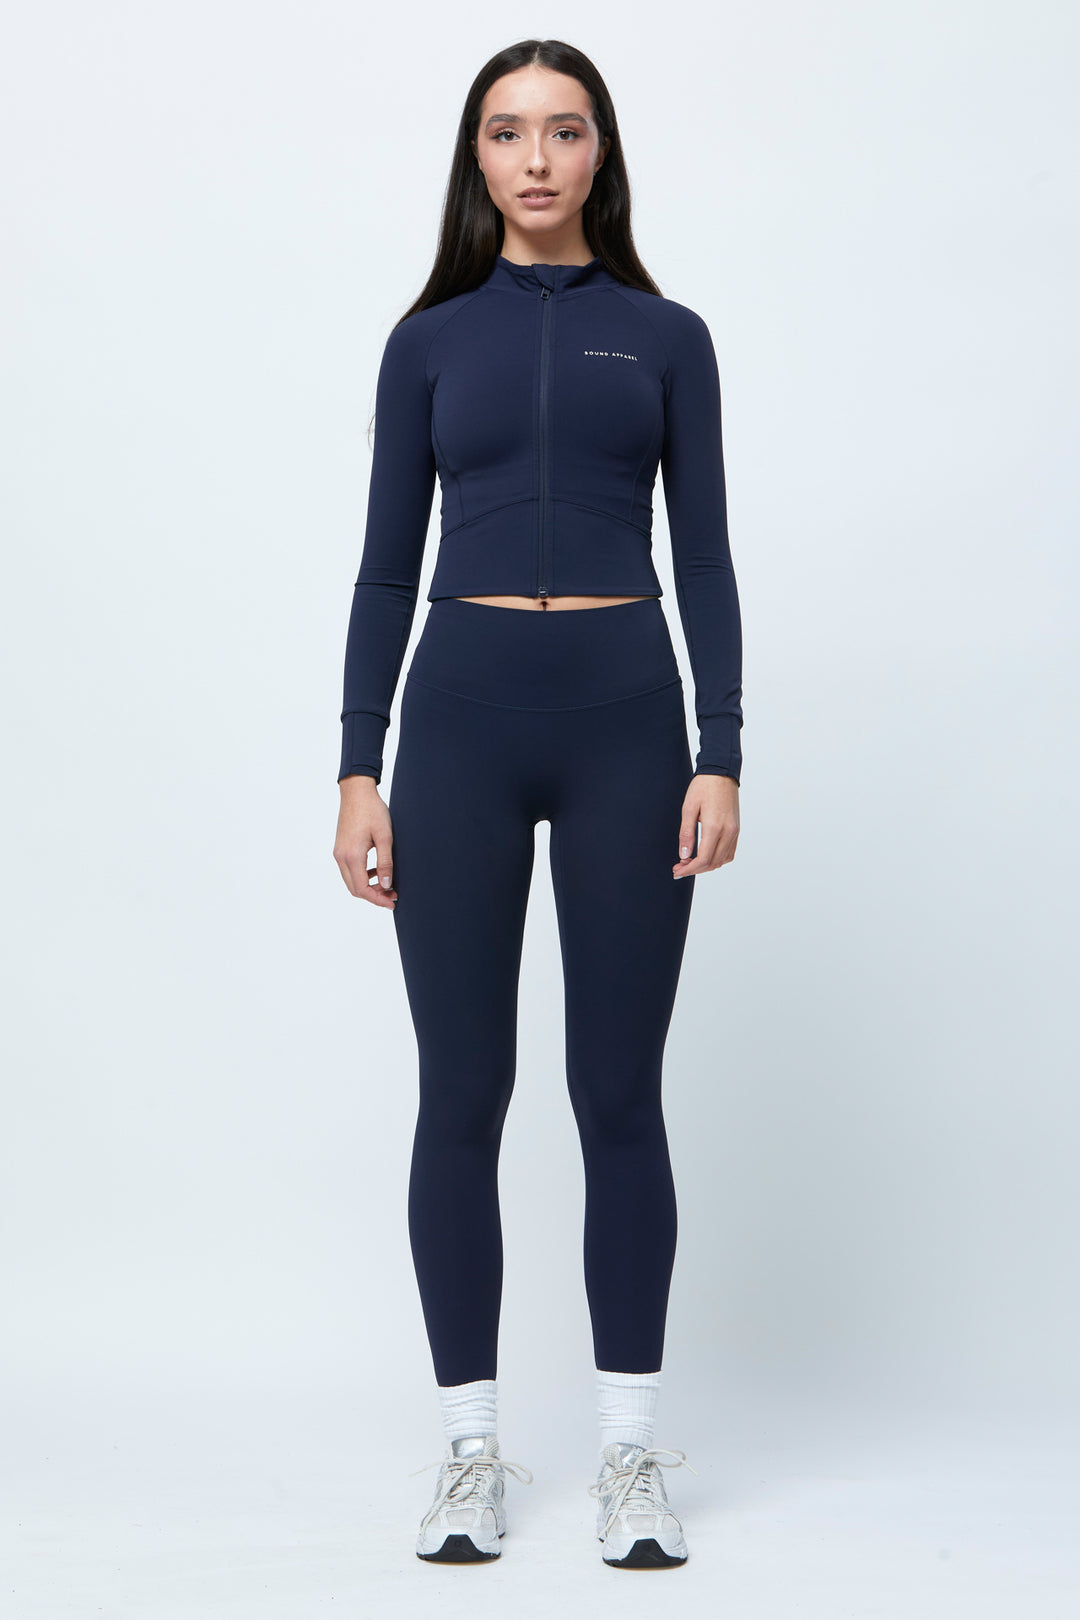 Space Blue Boundless Zip Top